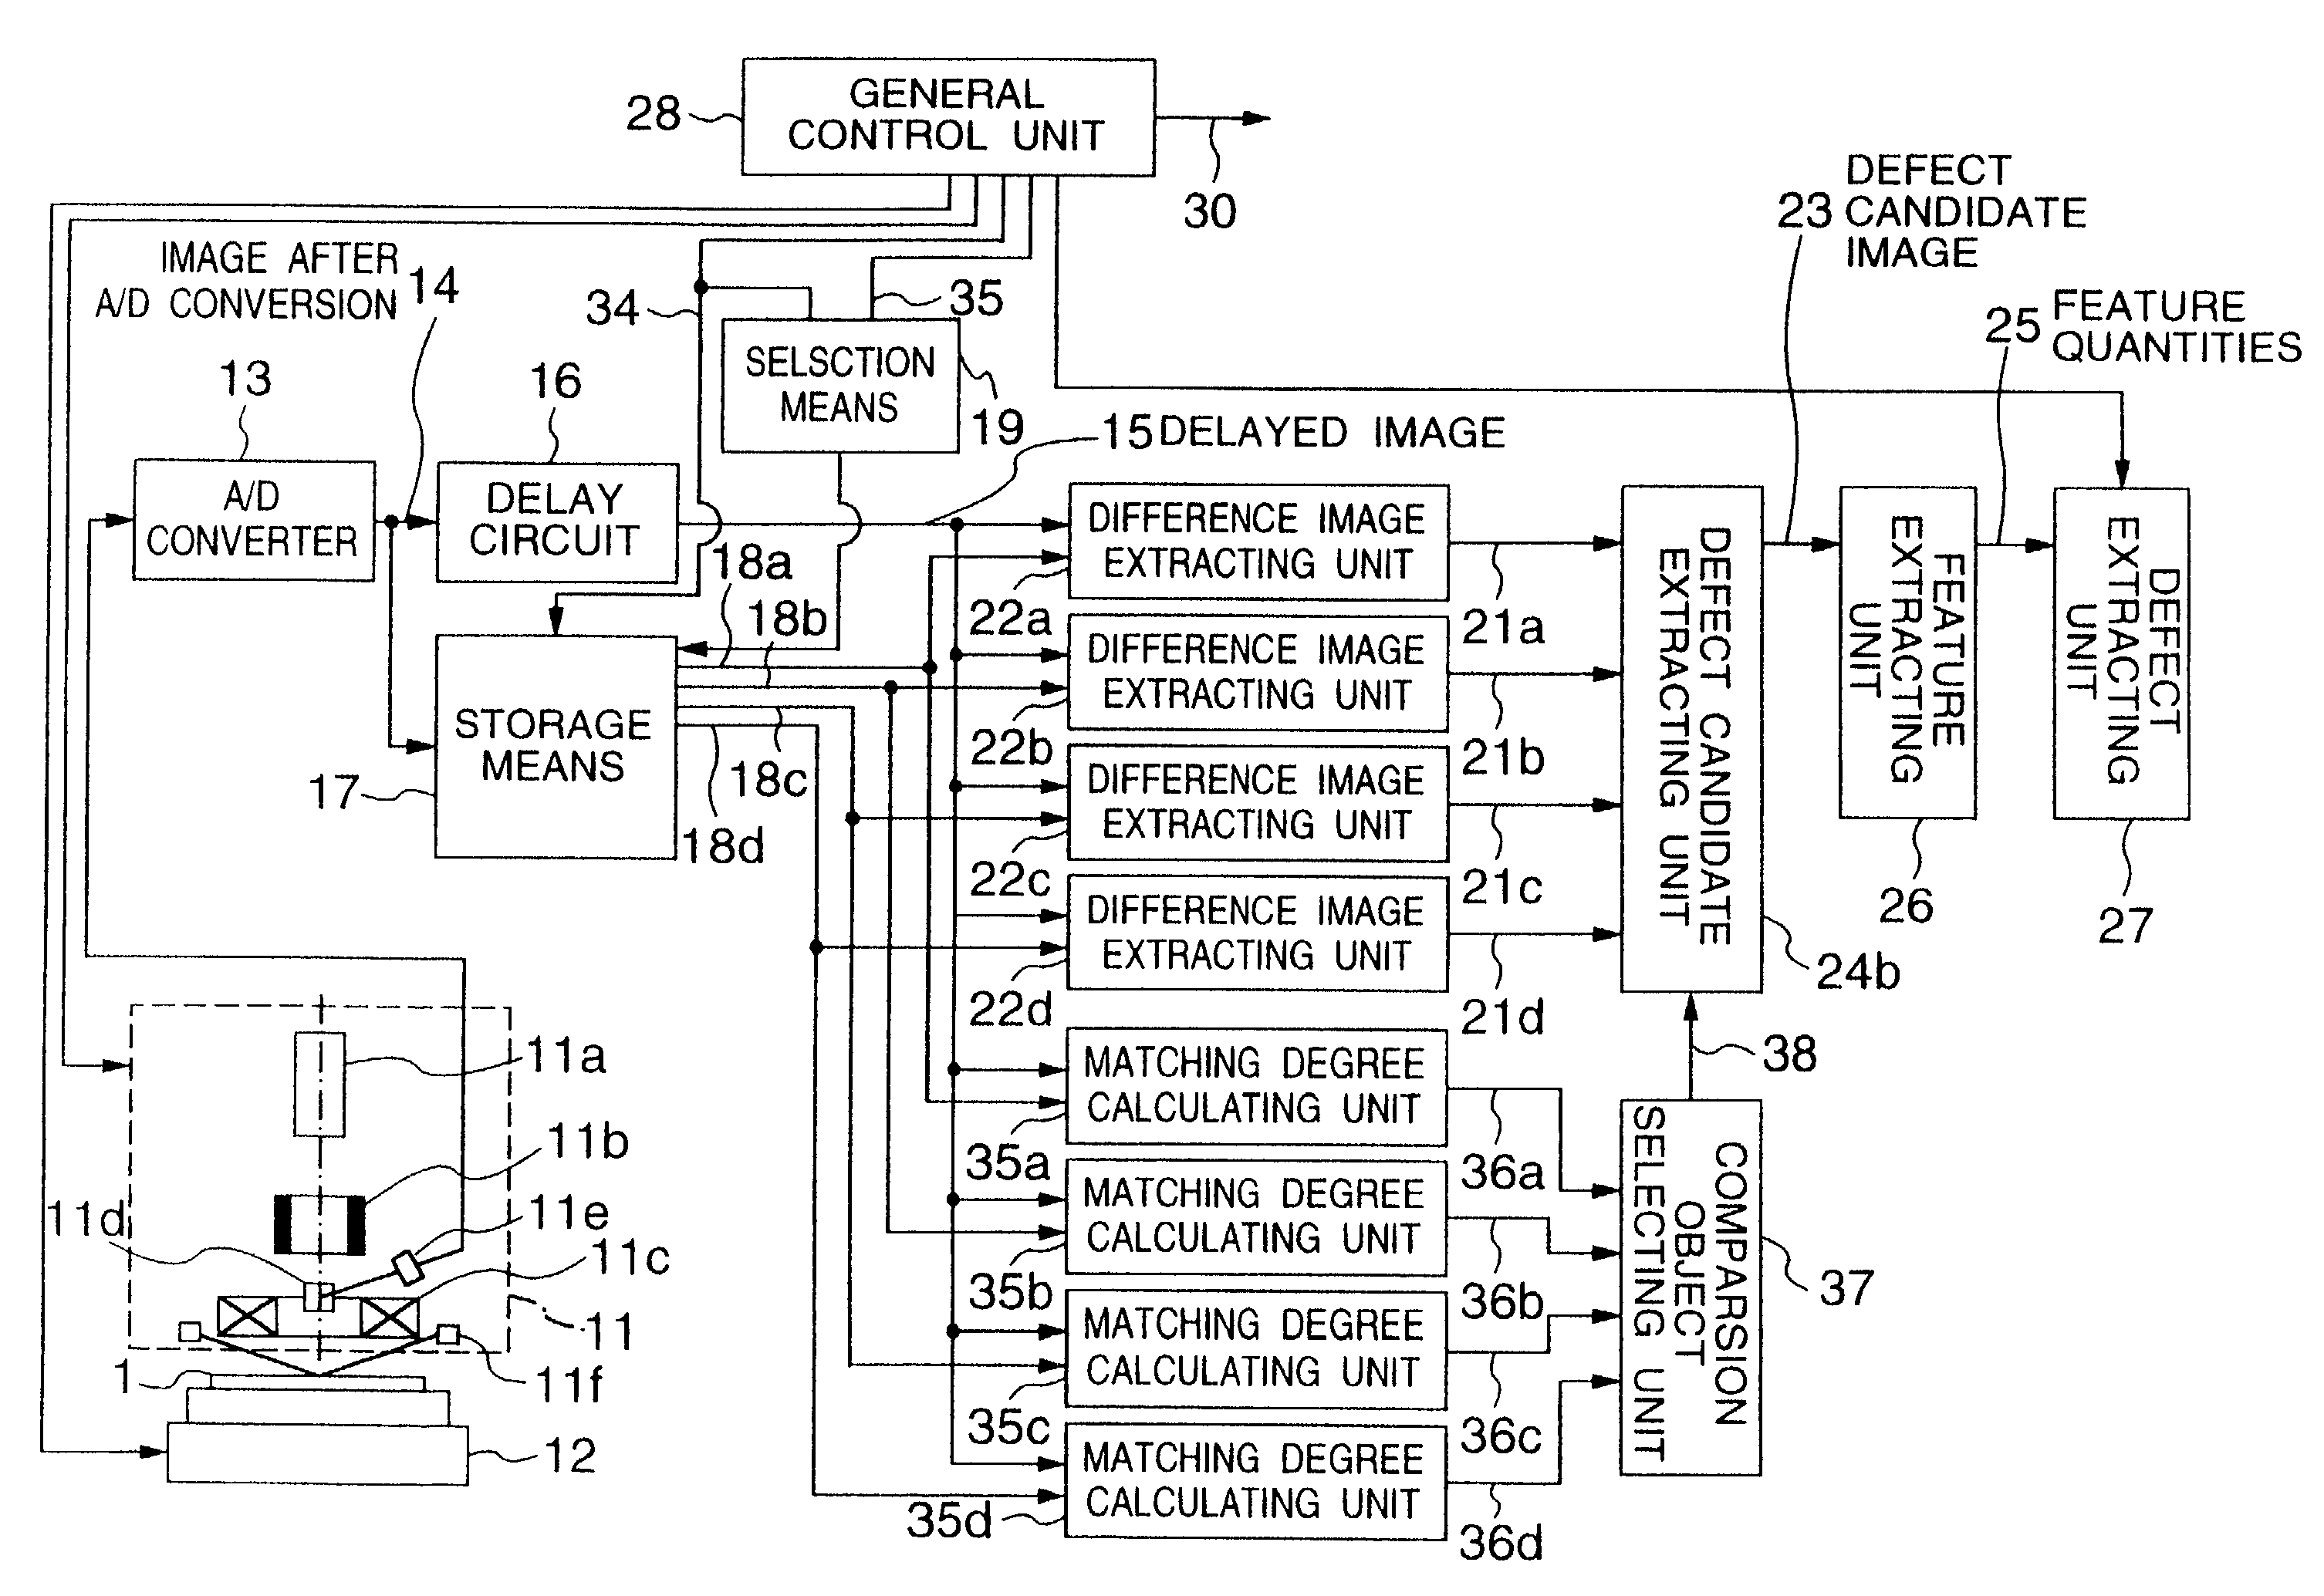 Method and system for inspecting a pattern